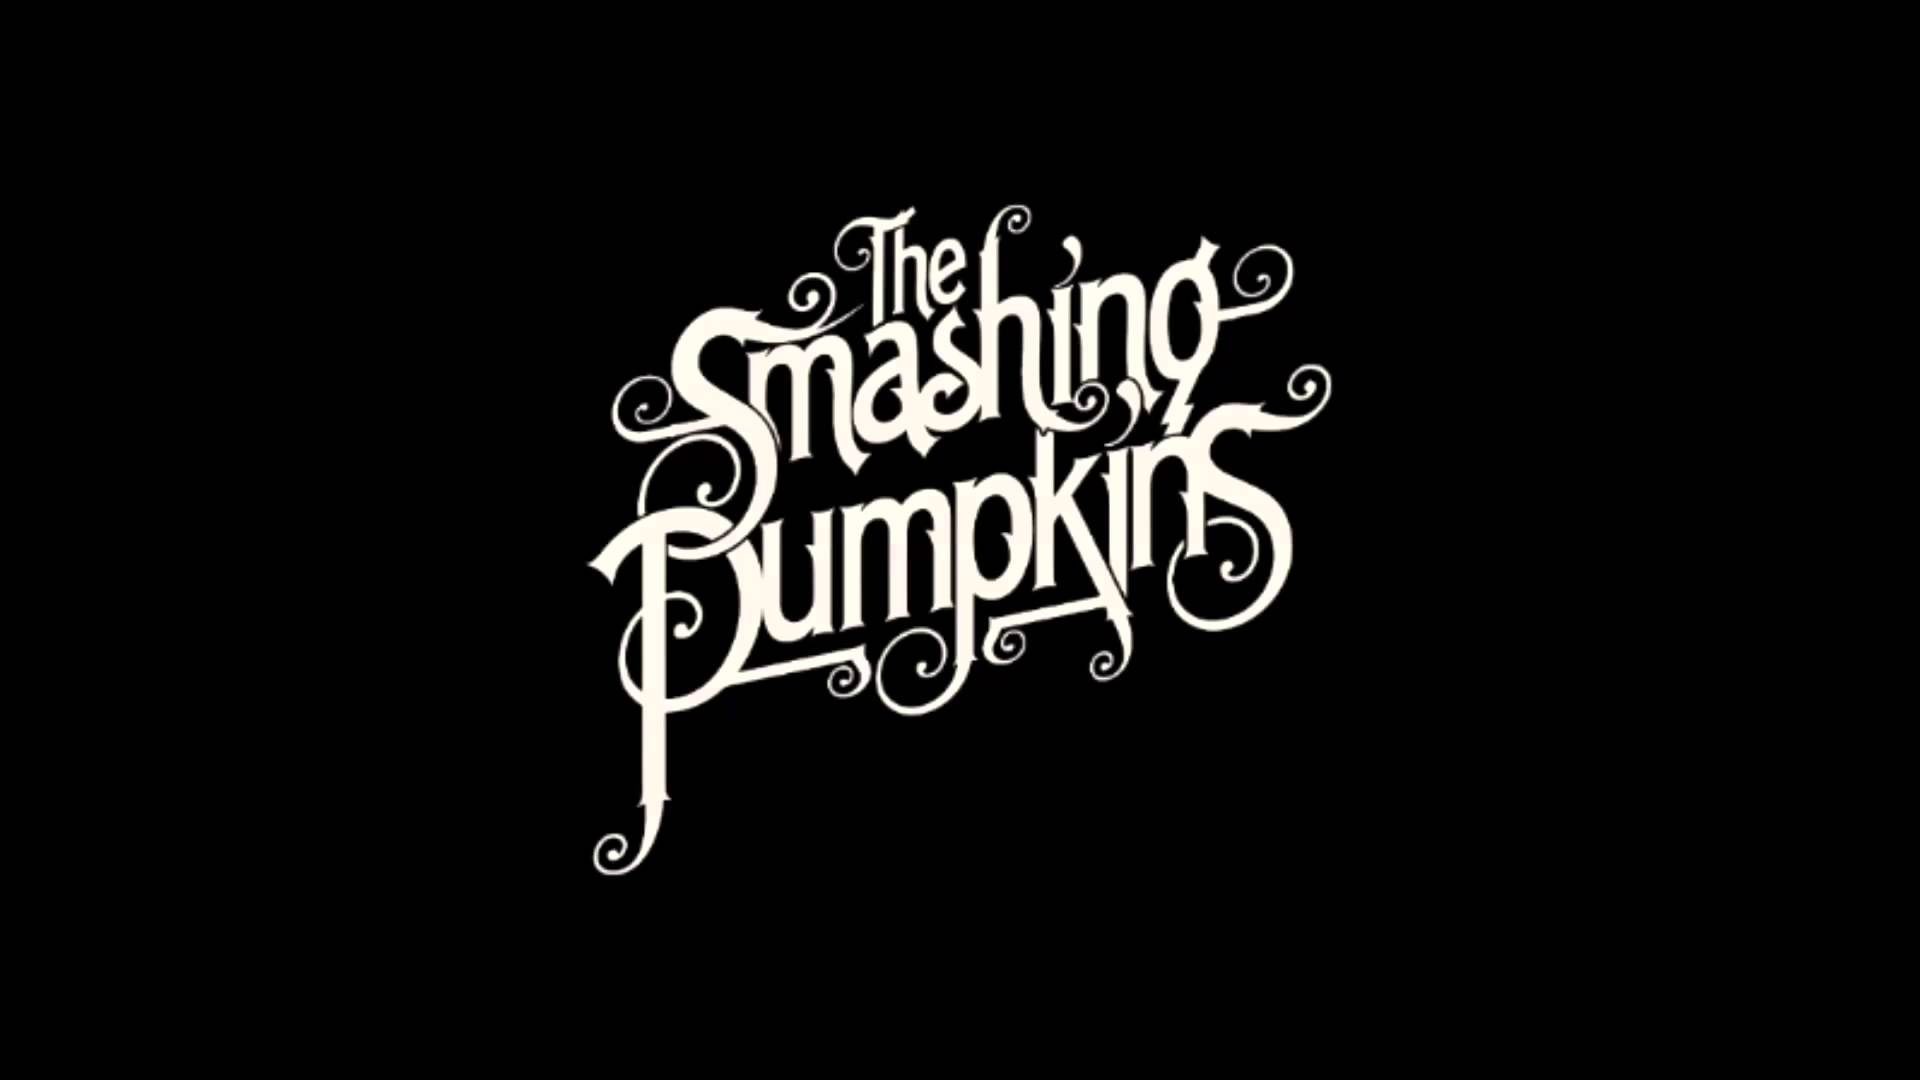 The Smashing Pumpkins, Top wallpapers, Captivating backgrounds, collection, 1920x1080 Full HD Desktop